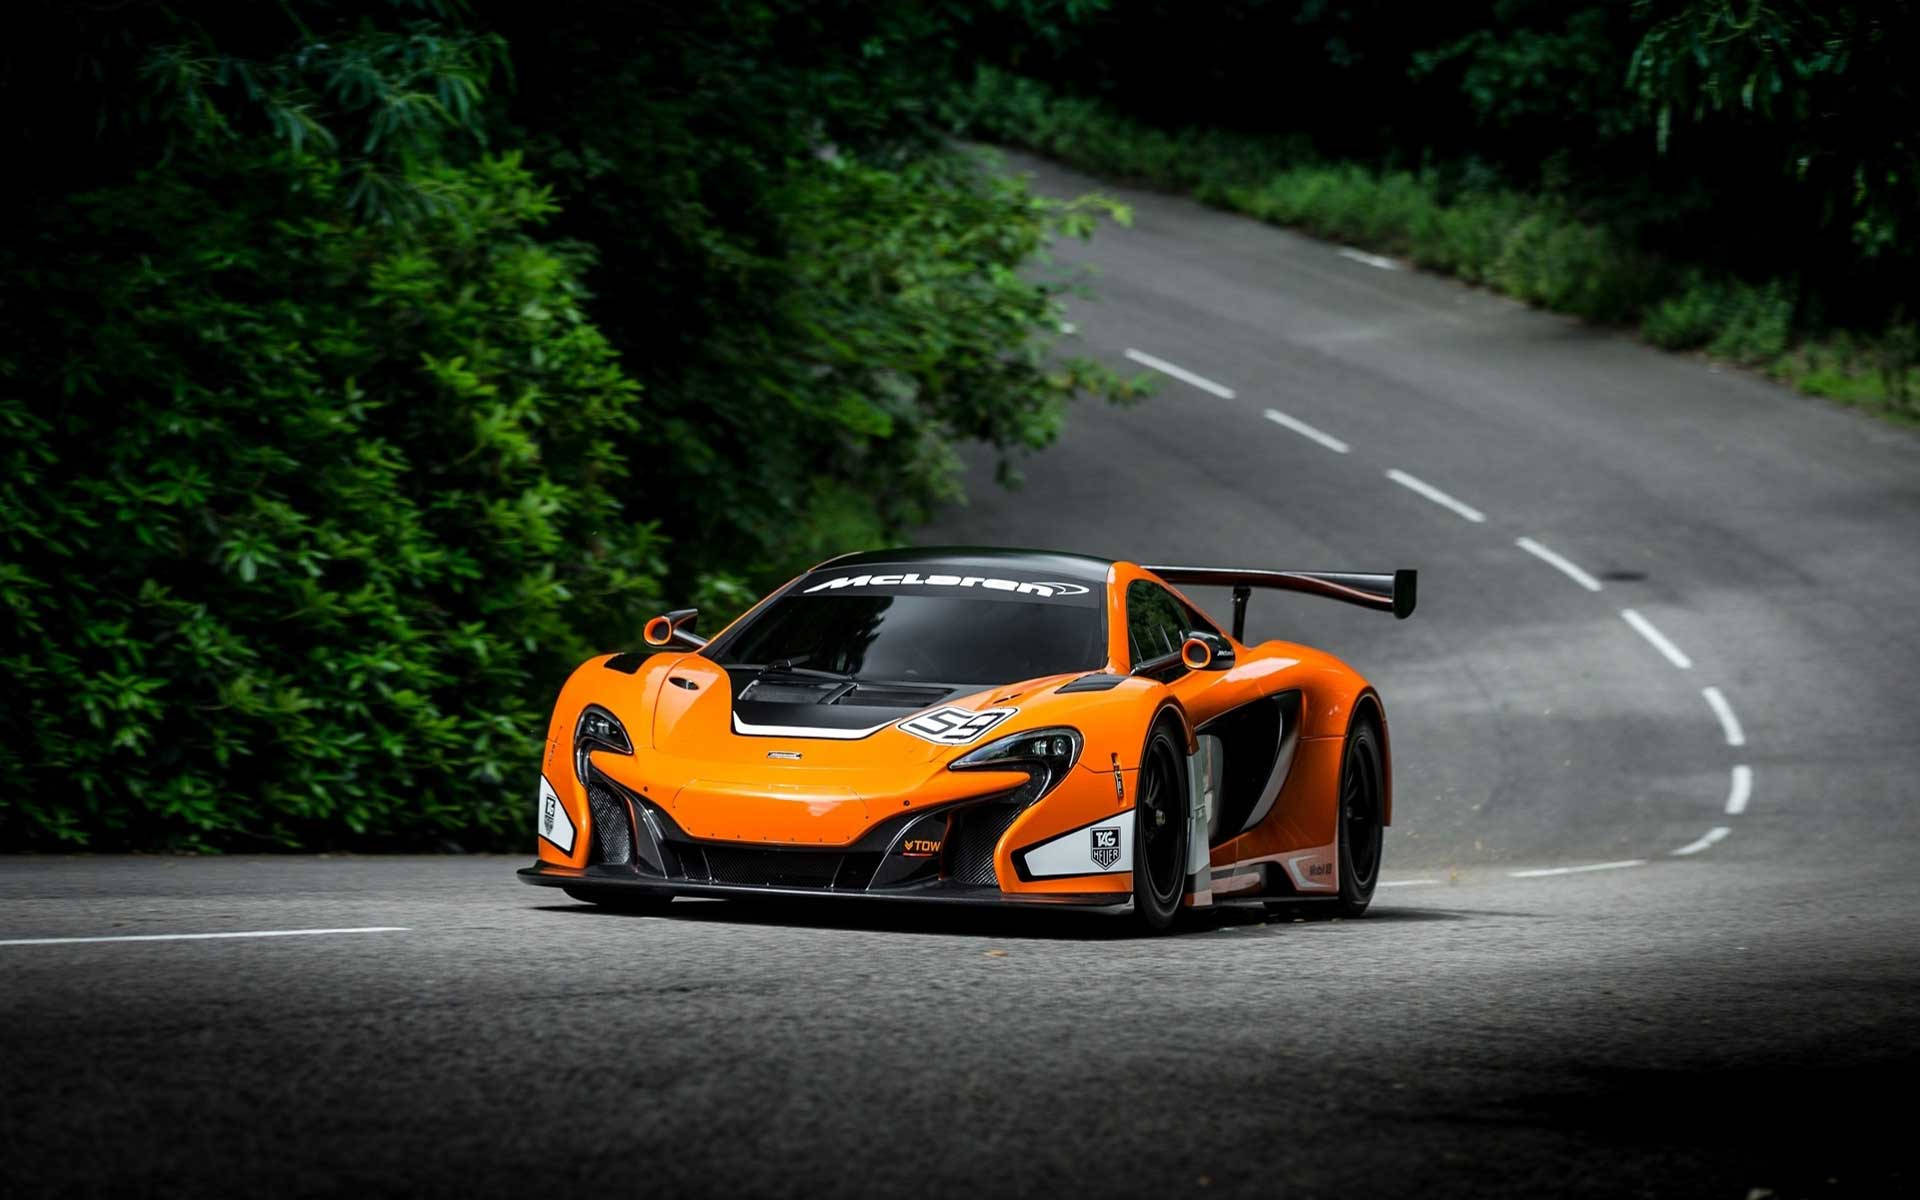 Dazzling McLaren GT3 - The Epitome of Really Cool Cars Wallpaper